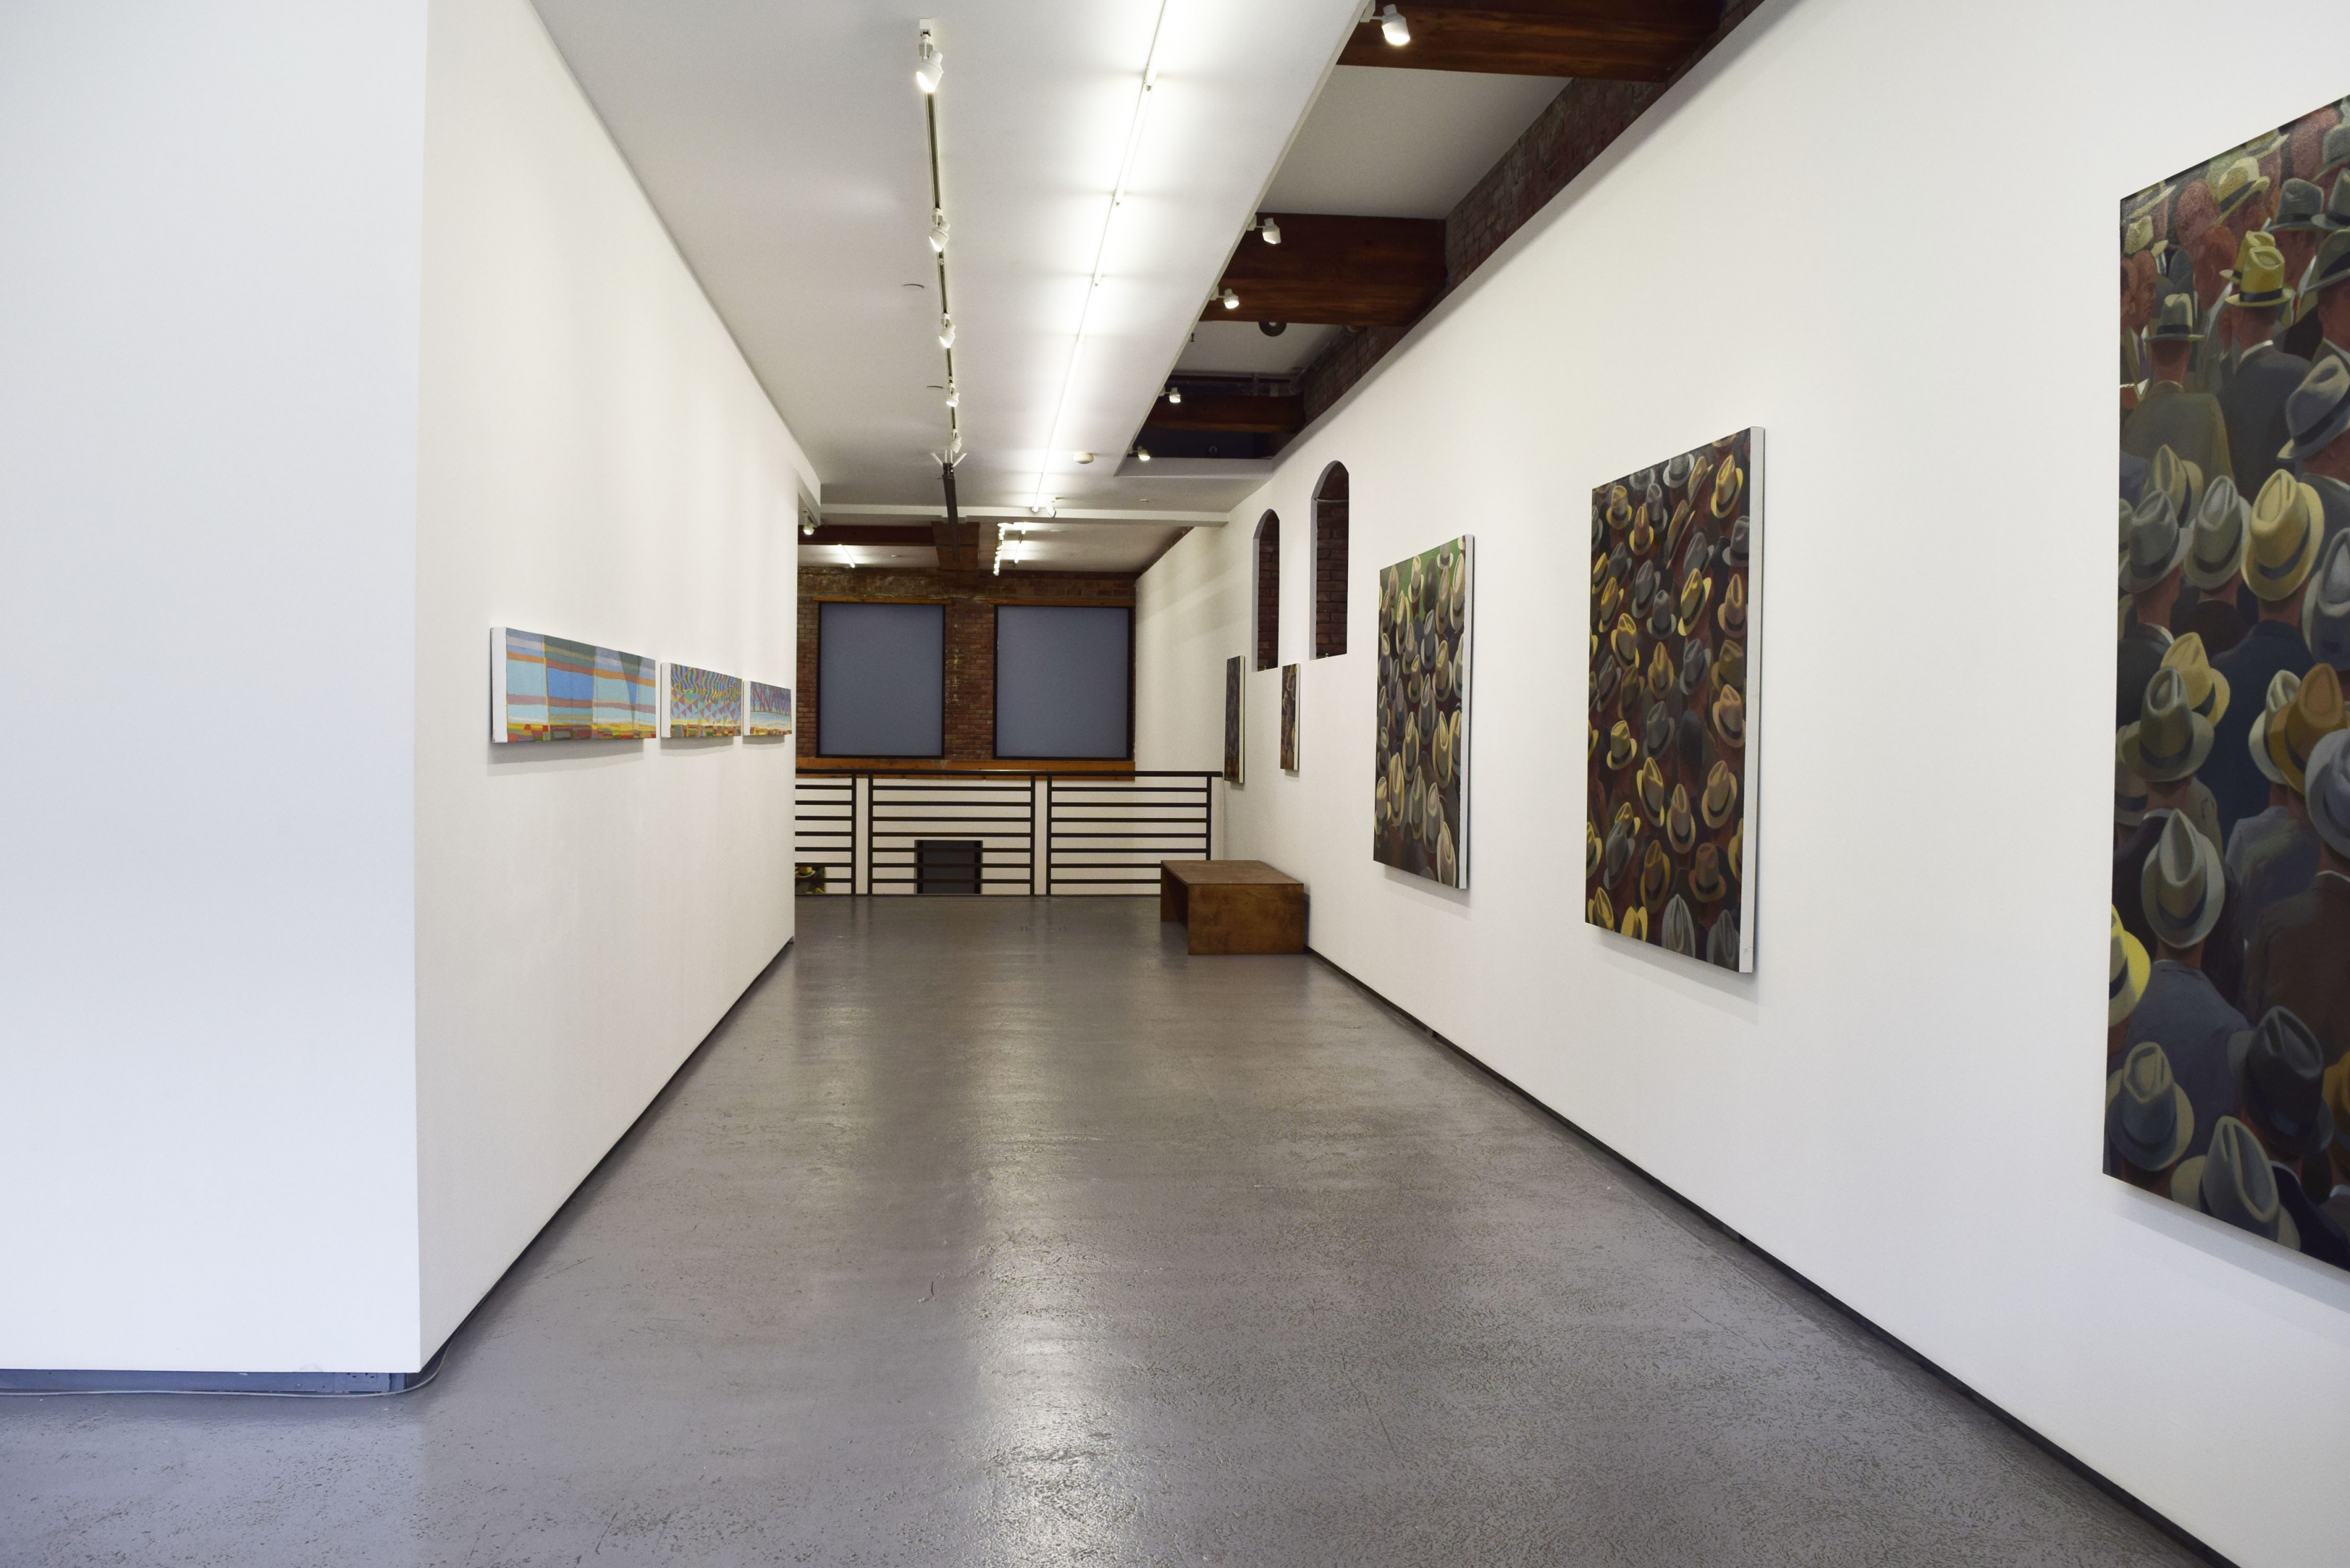 Installation view of Greg Drasler, Crowded Places/ Open Spaces, 2021.